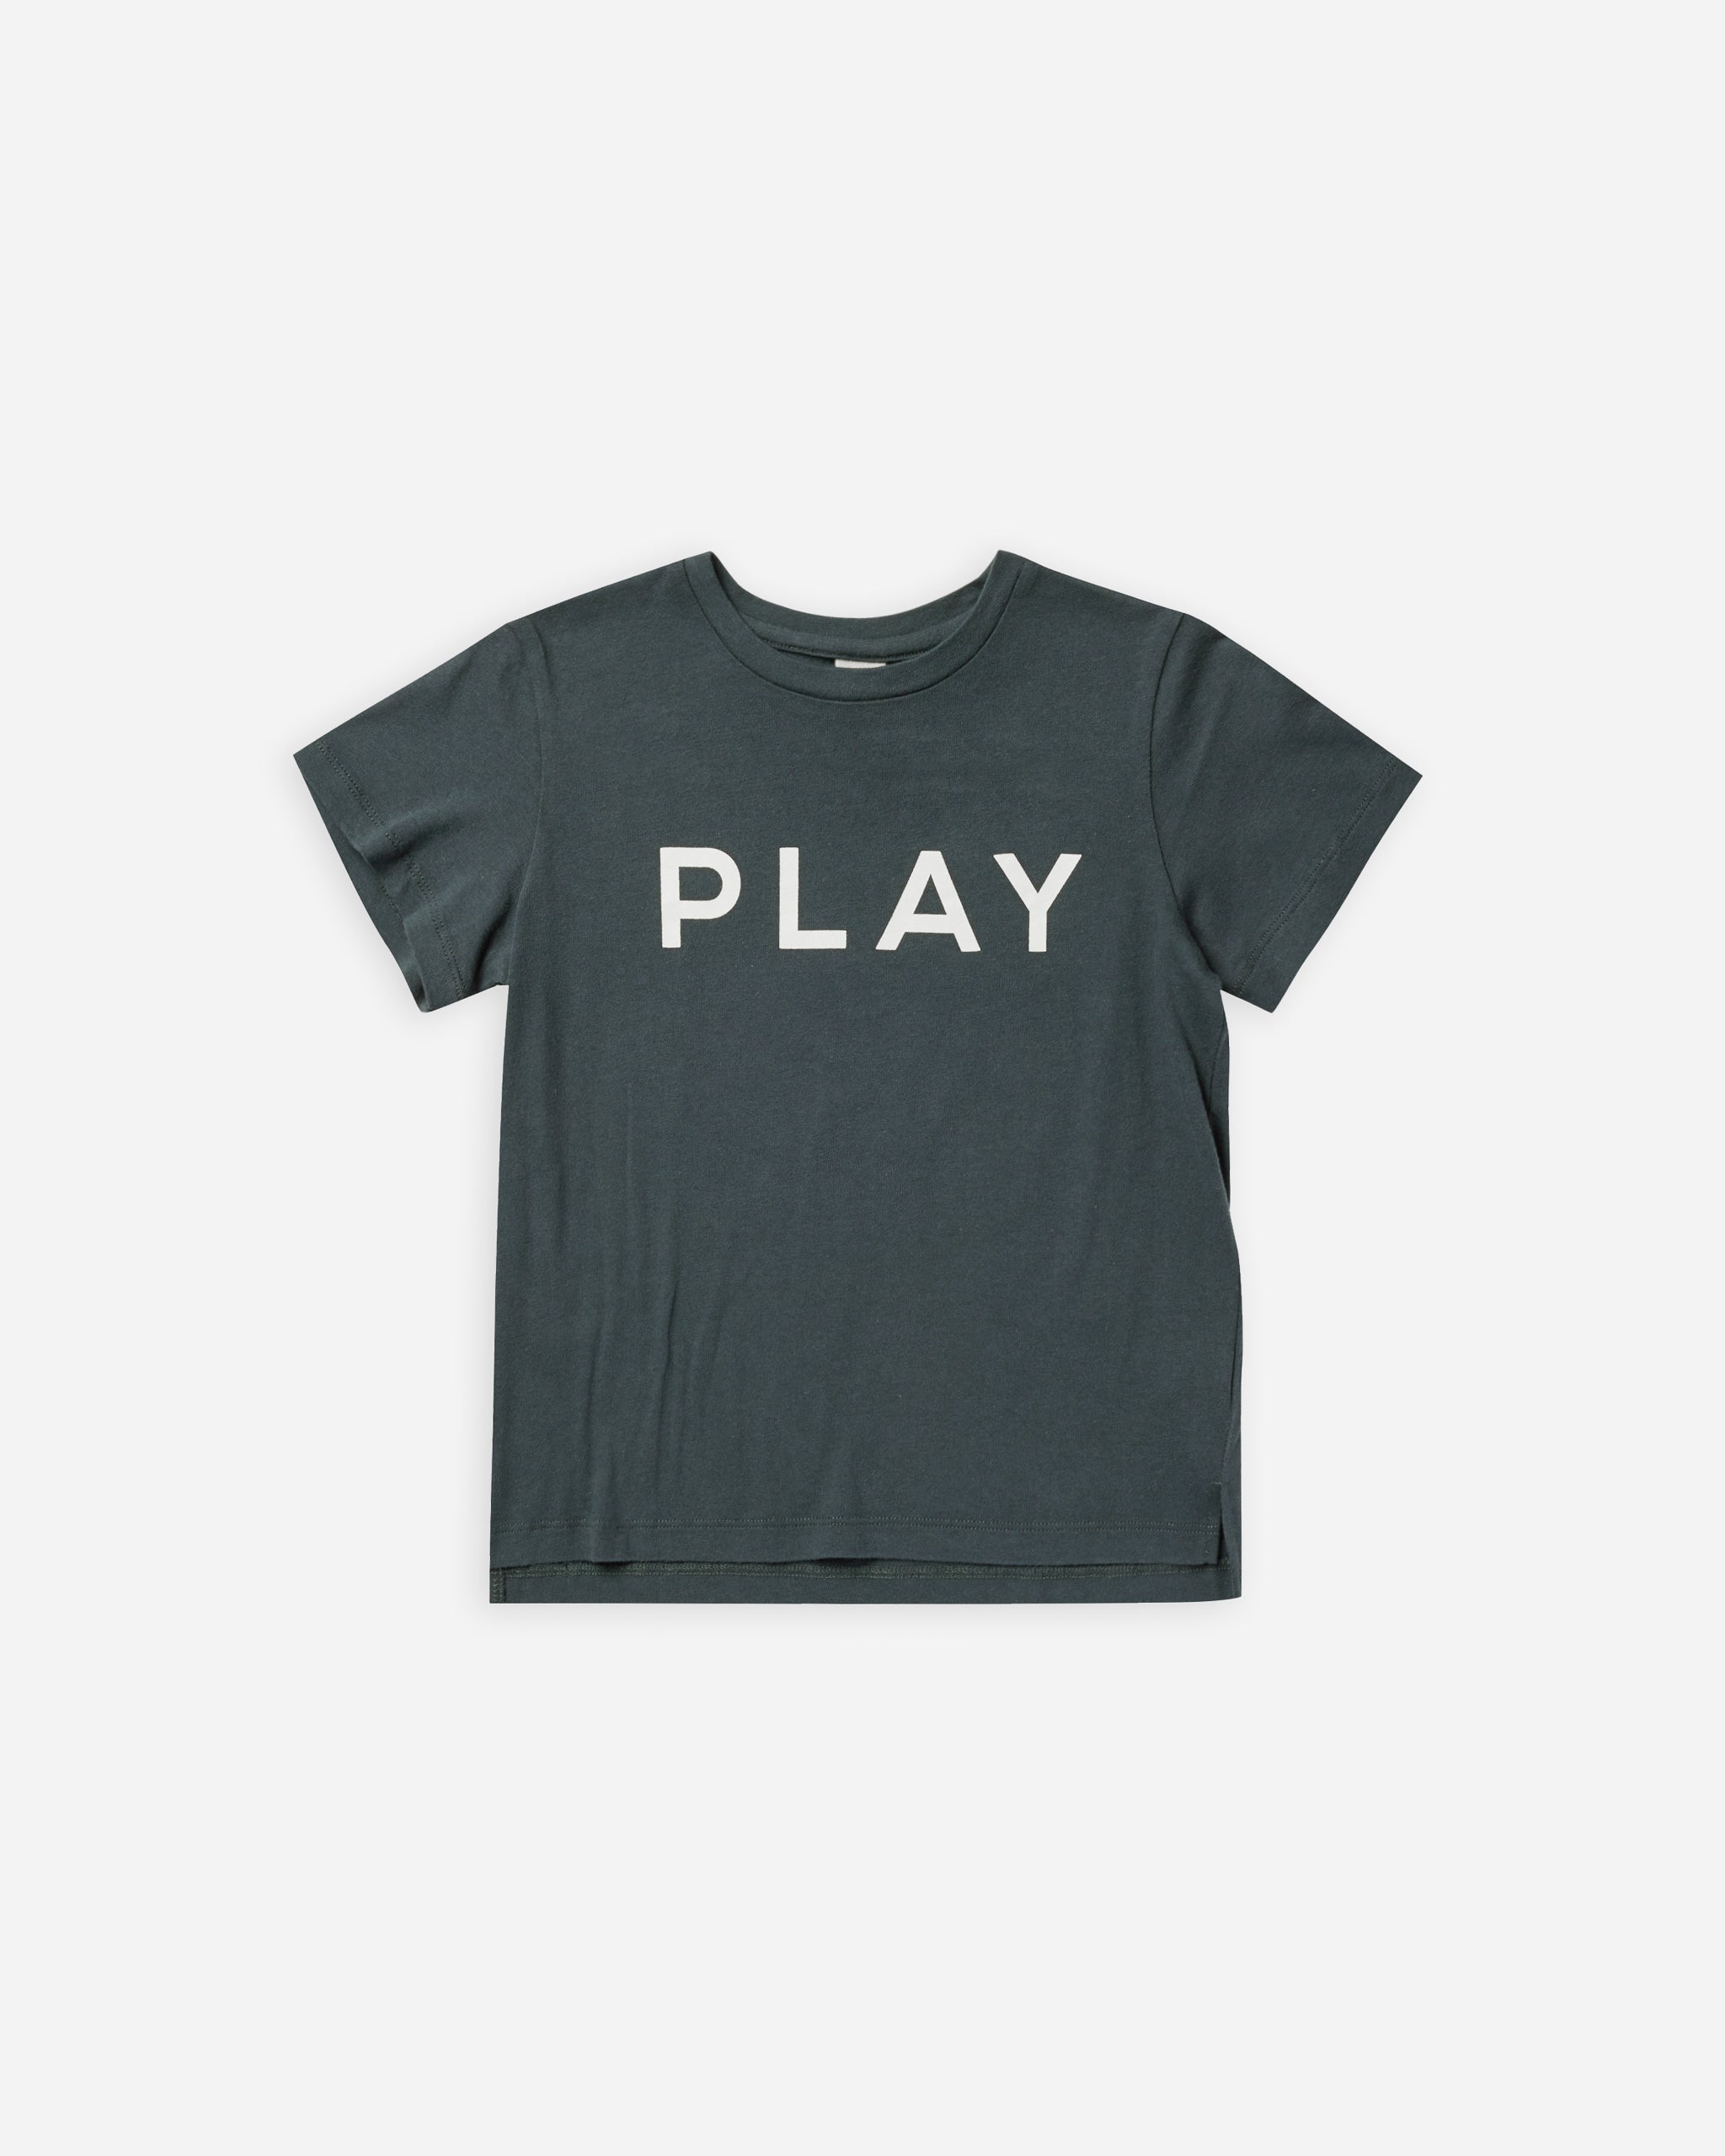 Cove Essential Tee | Indigo - Rylee + Cru | Kids Clothes | Trendy Baby Clothes | Modern Infant Outfits |